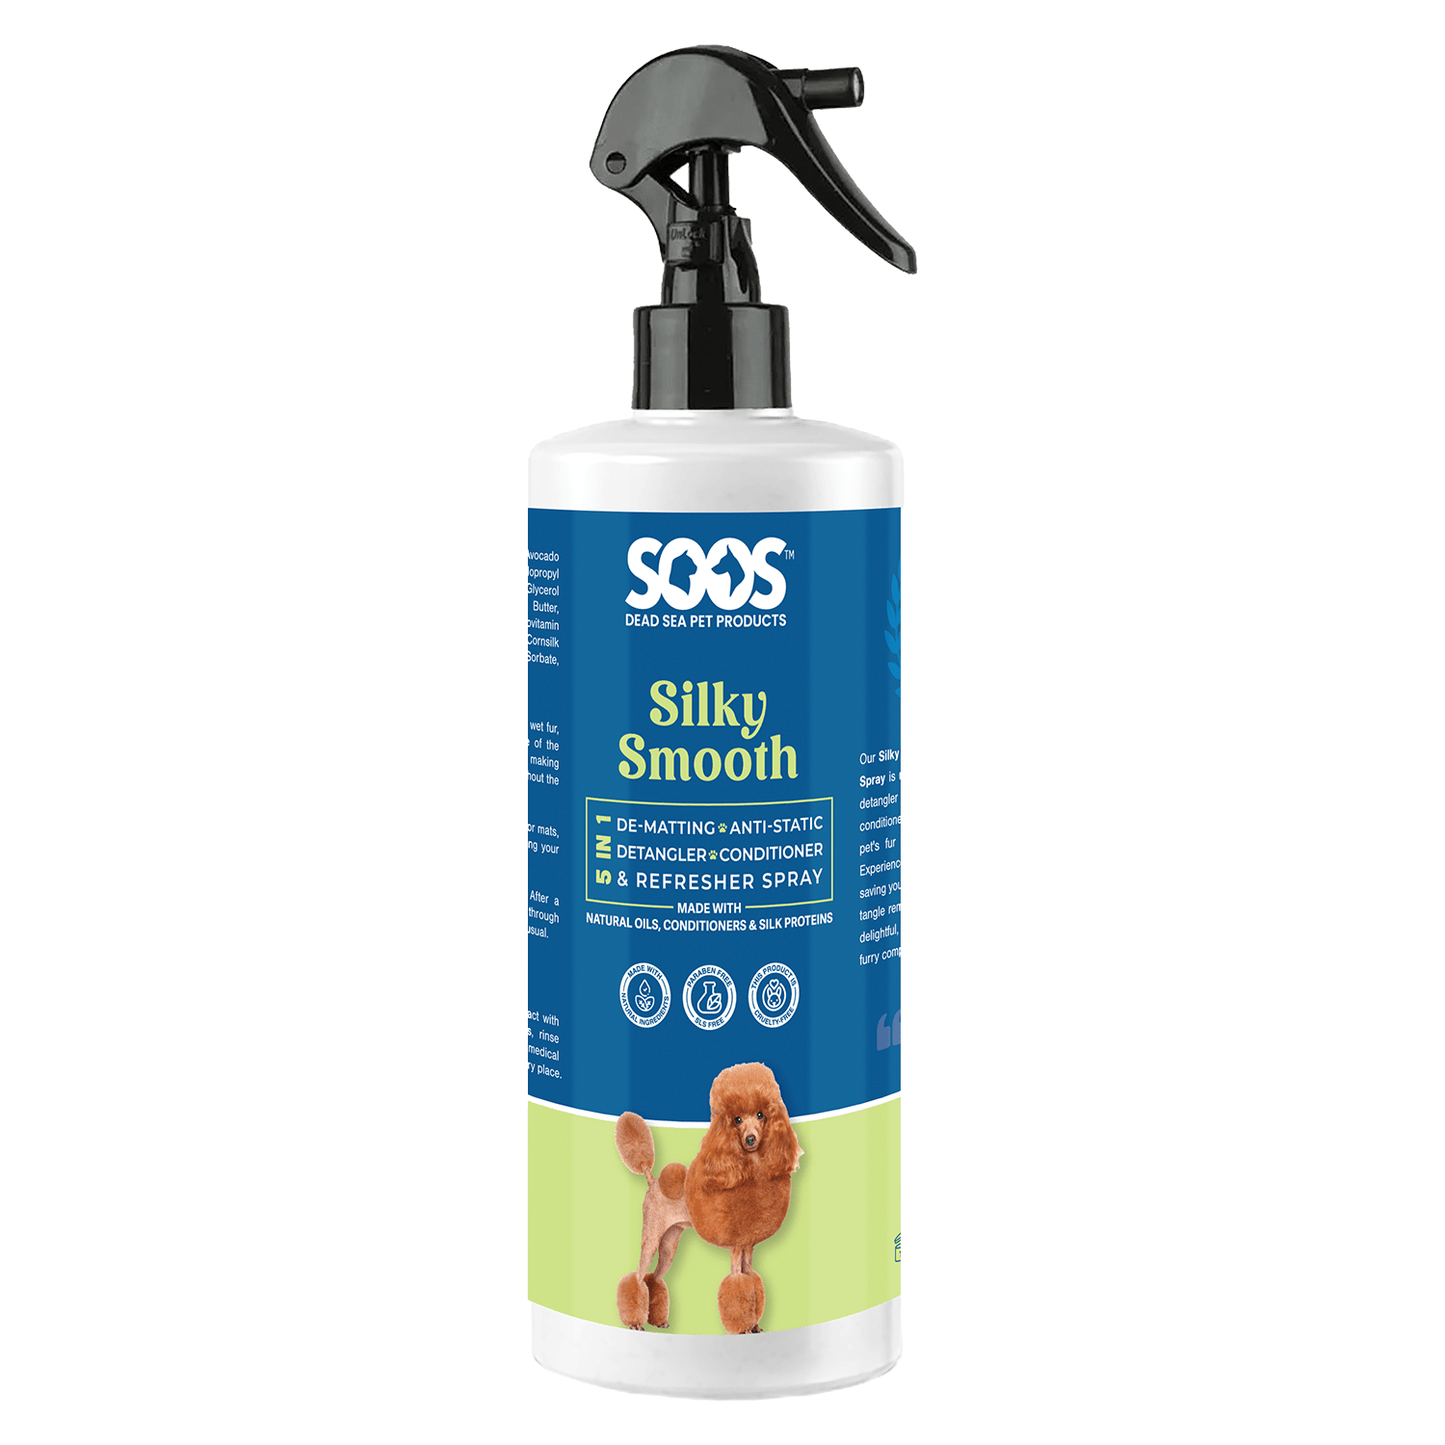 Silky Smooth 5-in-1 Leave-on Conditioning Spray for Dogs and Cats by Soos Pets - Soos Pets